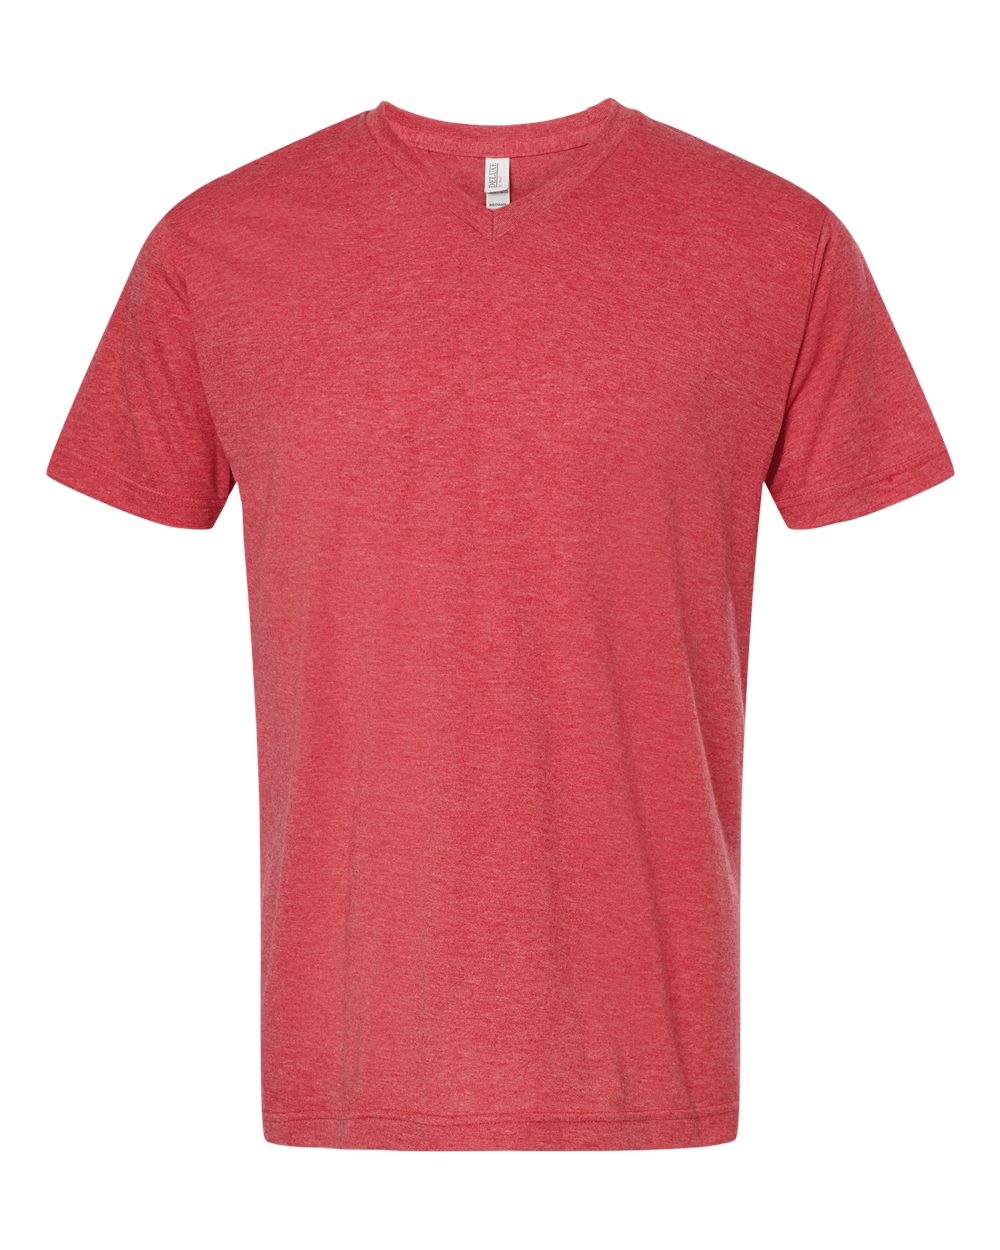 M&O Deluxe Blend V-Neck T-Shirt 3543 #color_Heather Red